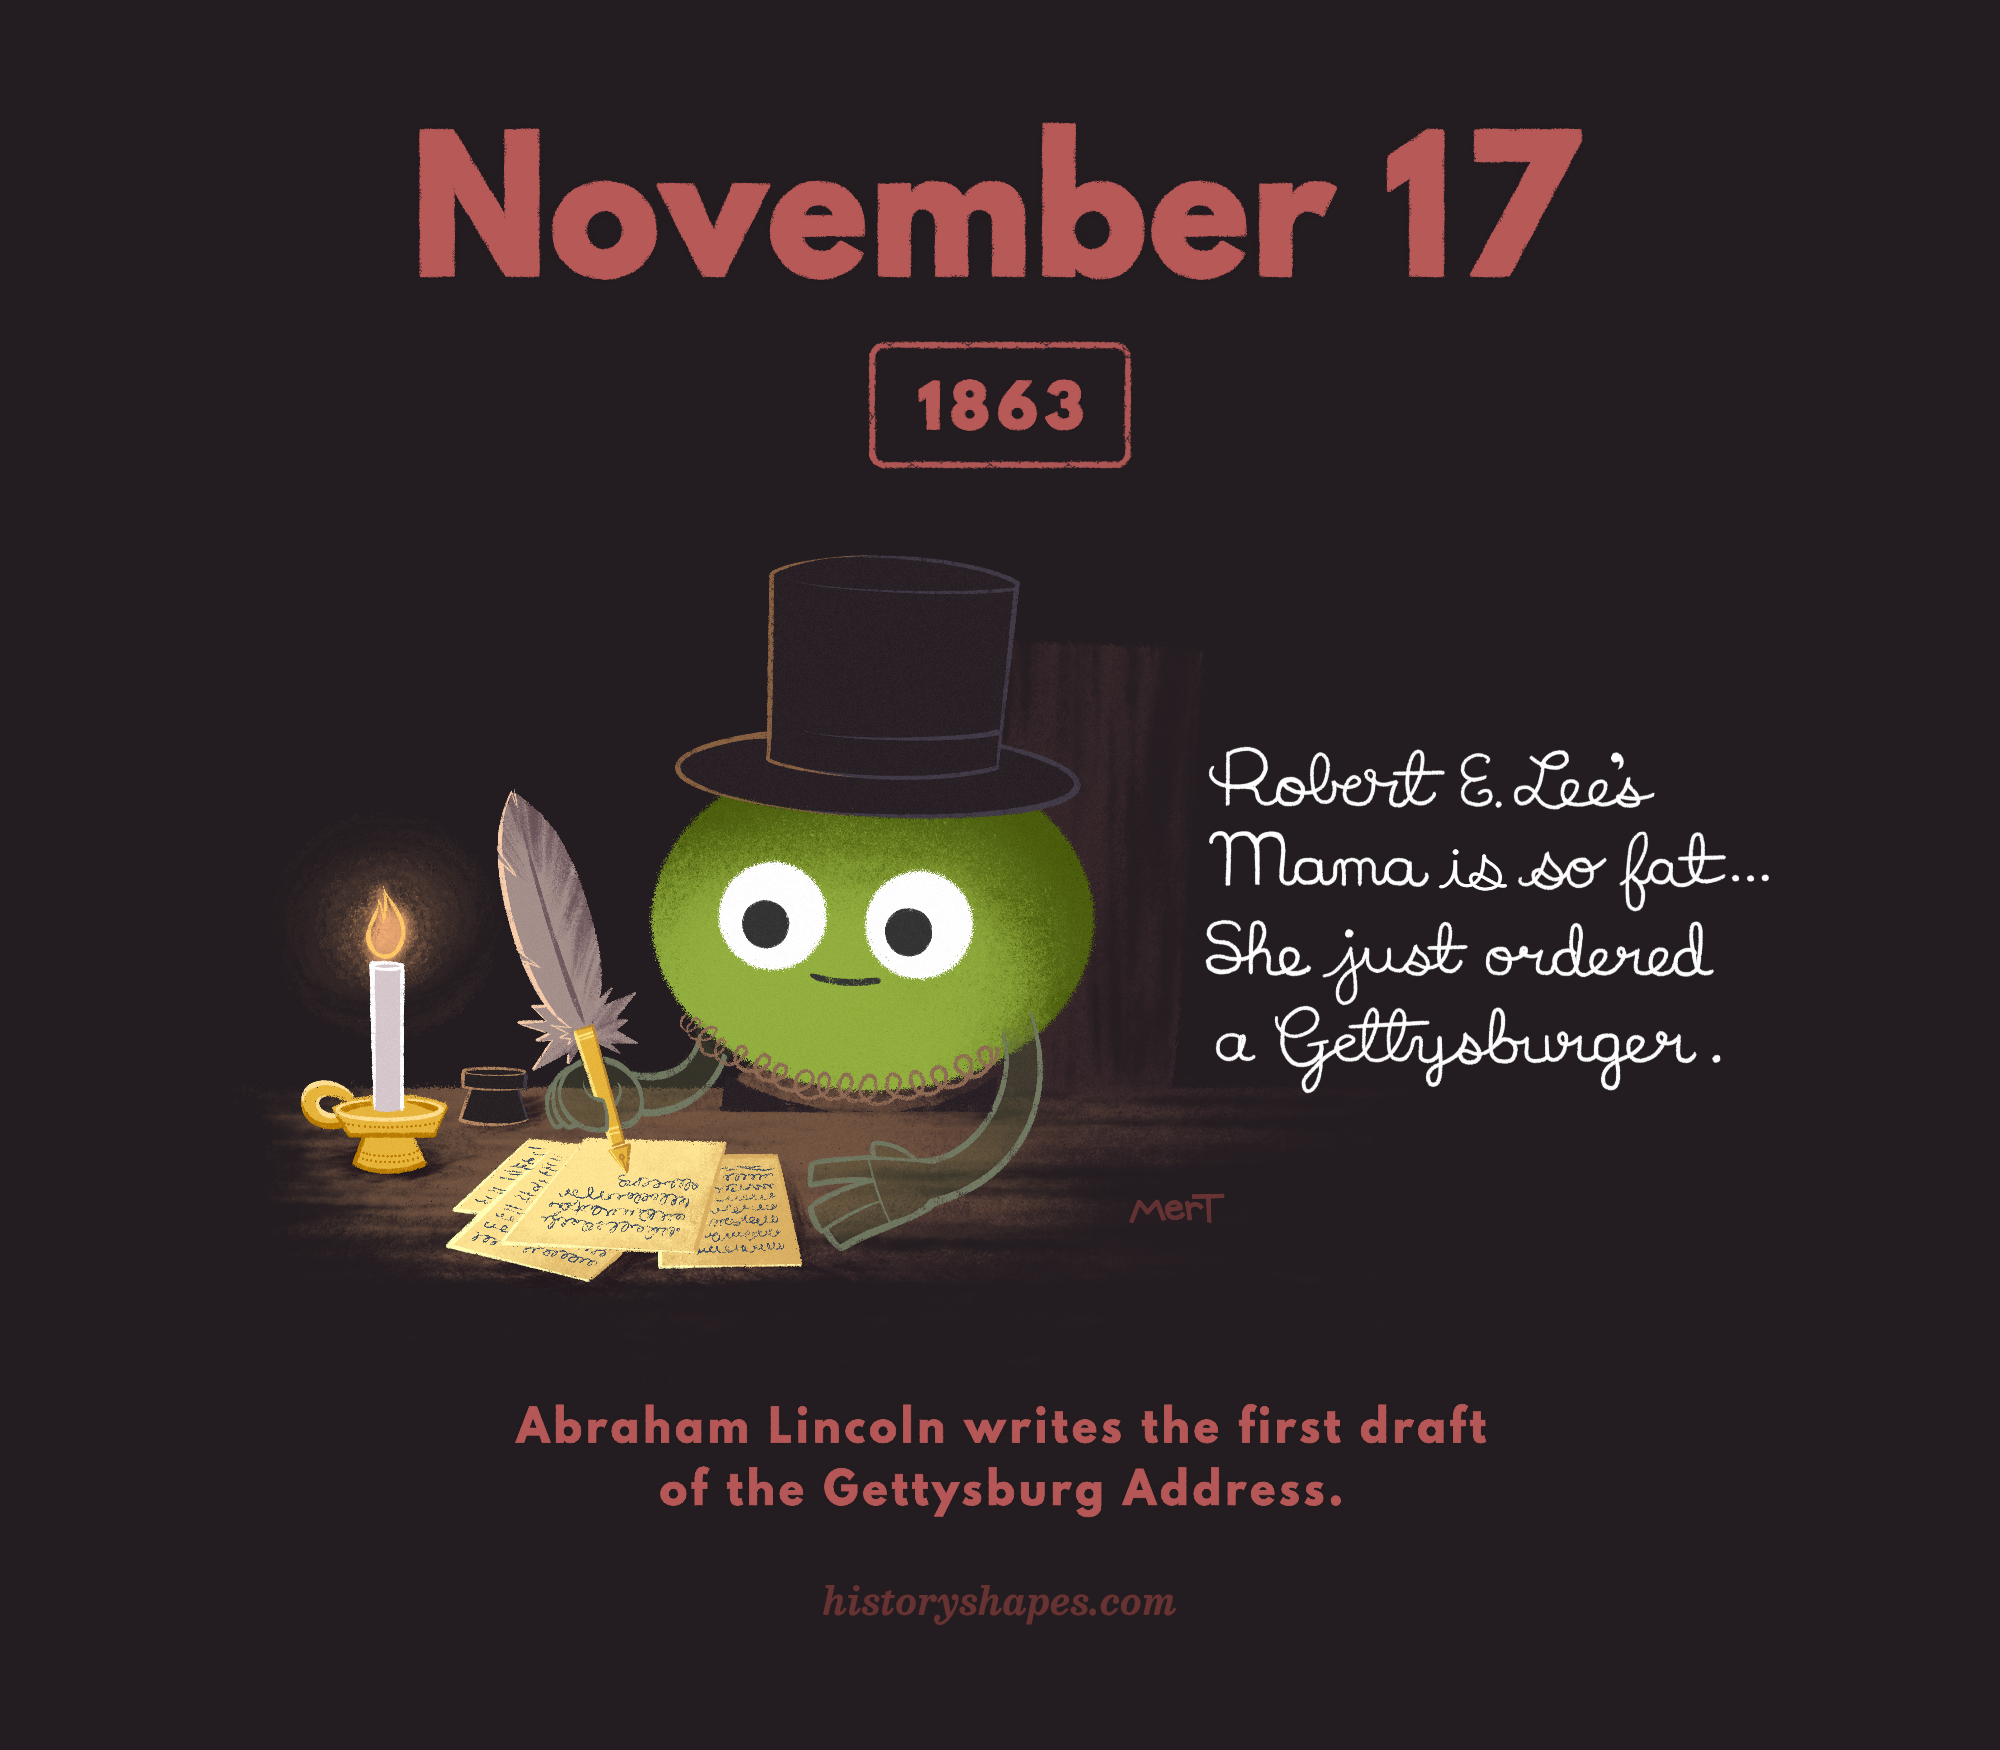 Morgan, a green oval, is dressed as Abraham Lincoln. He writes by candlelight with a feather quill: "Robert E. Lee's mama is so fat, she just ordered a Gettysburger."